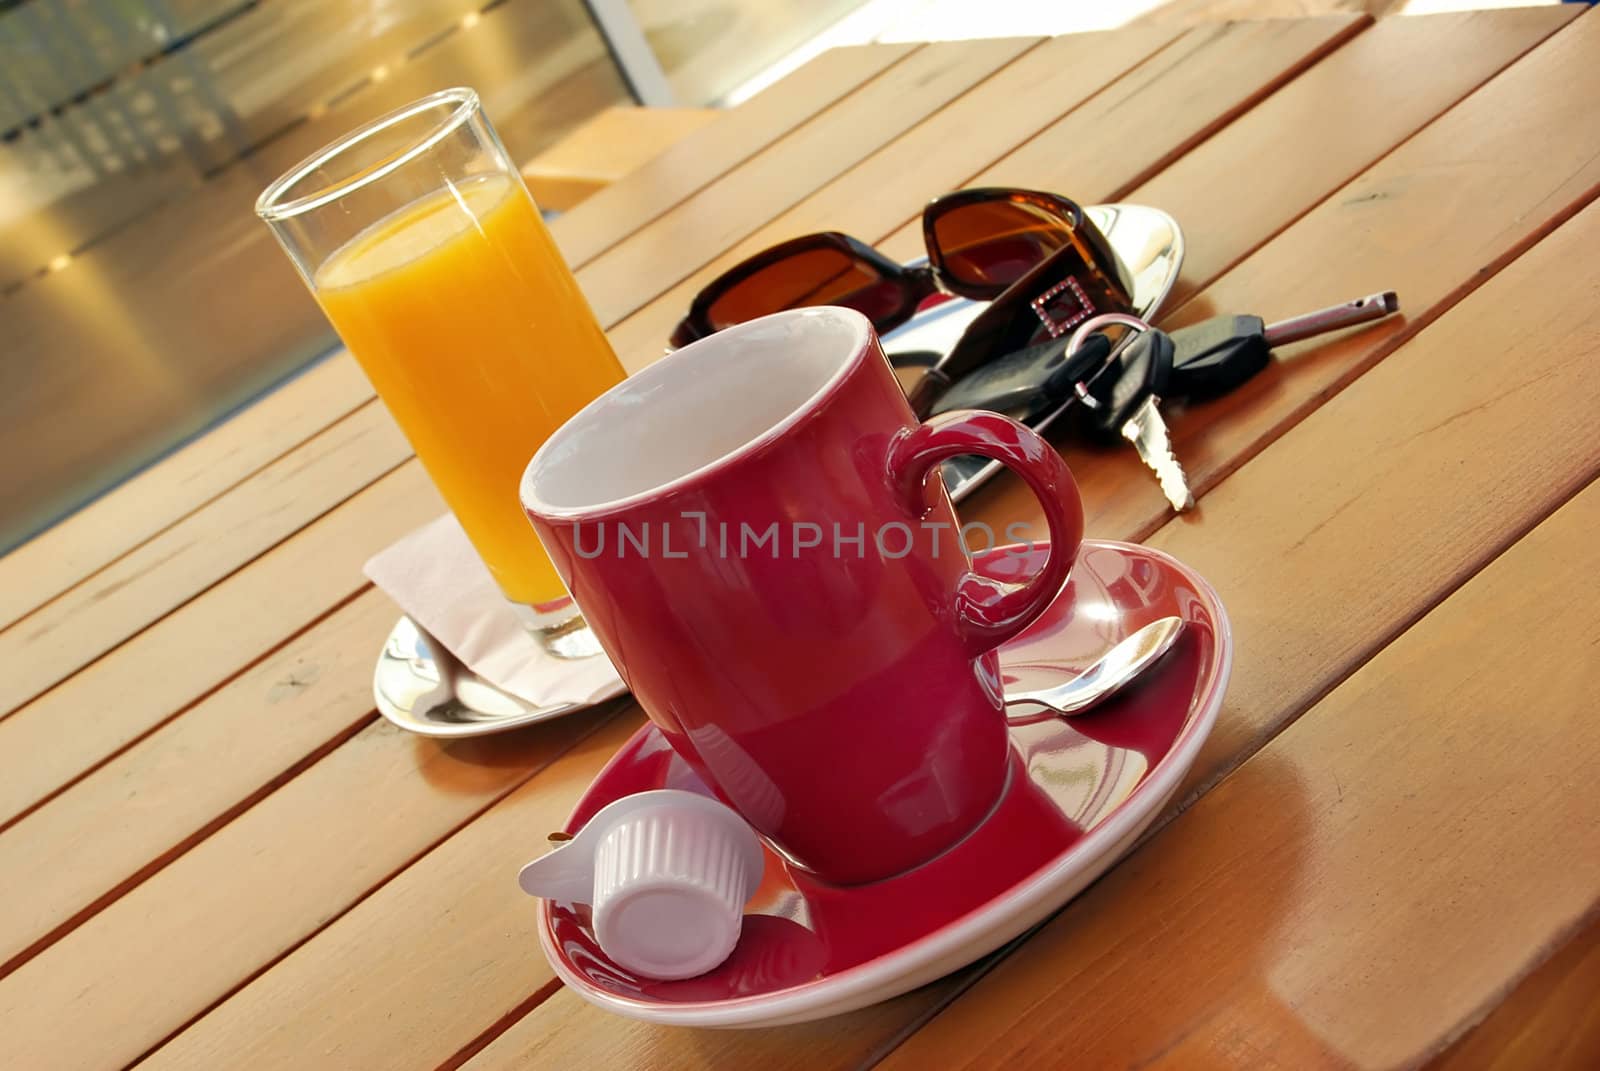 Red cup of coffee, juice, sunglasses and car key on table